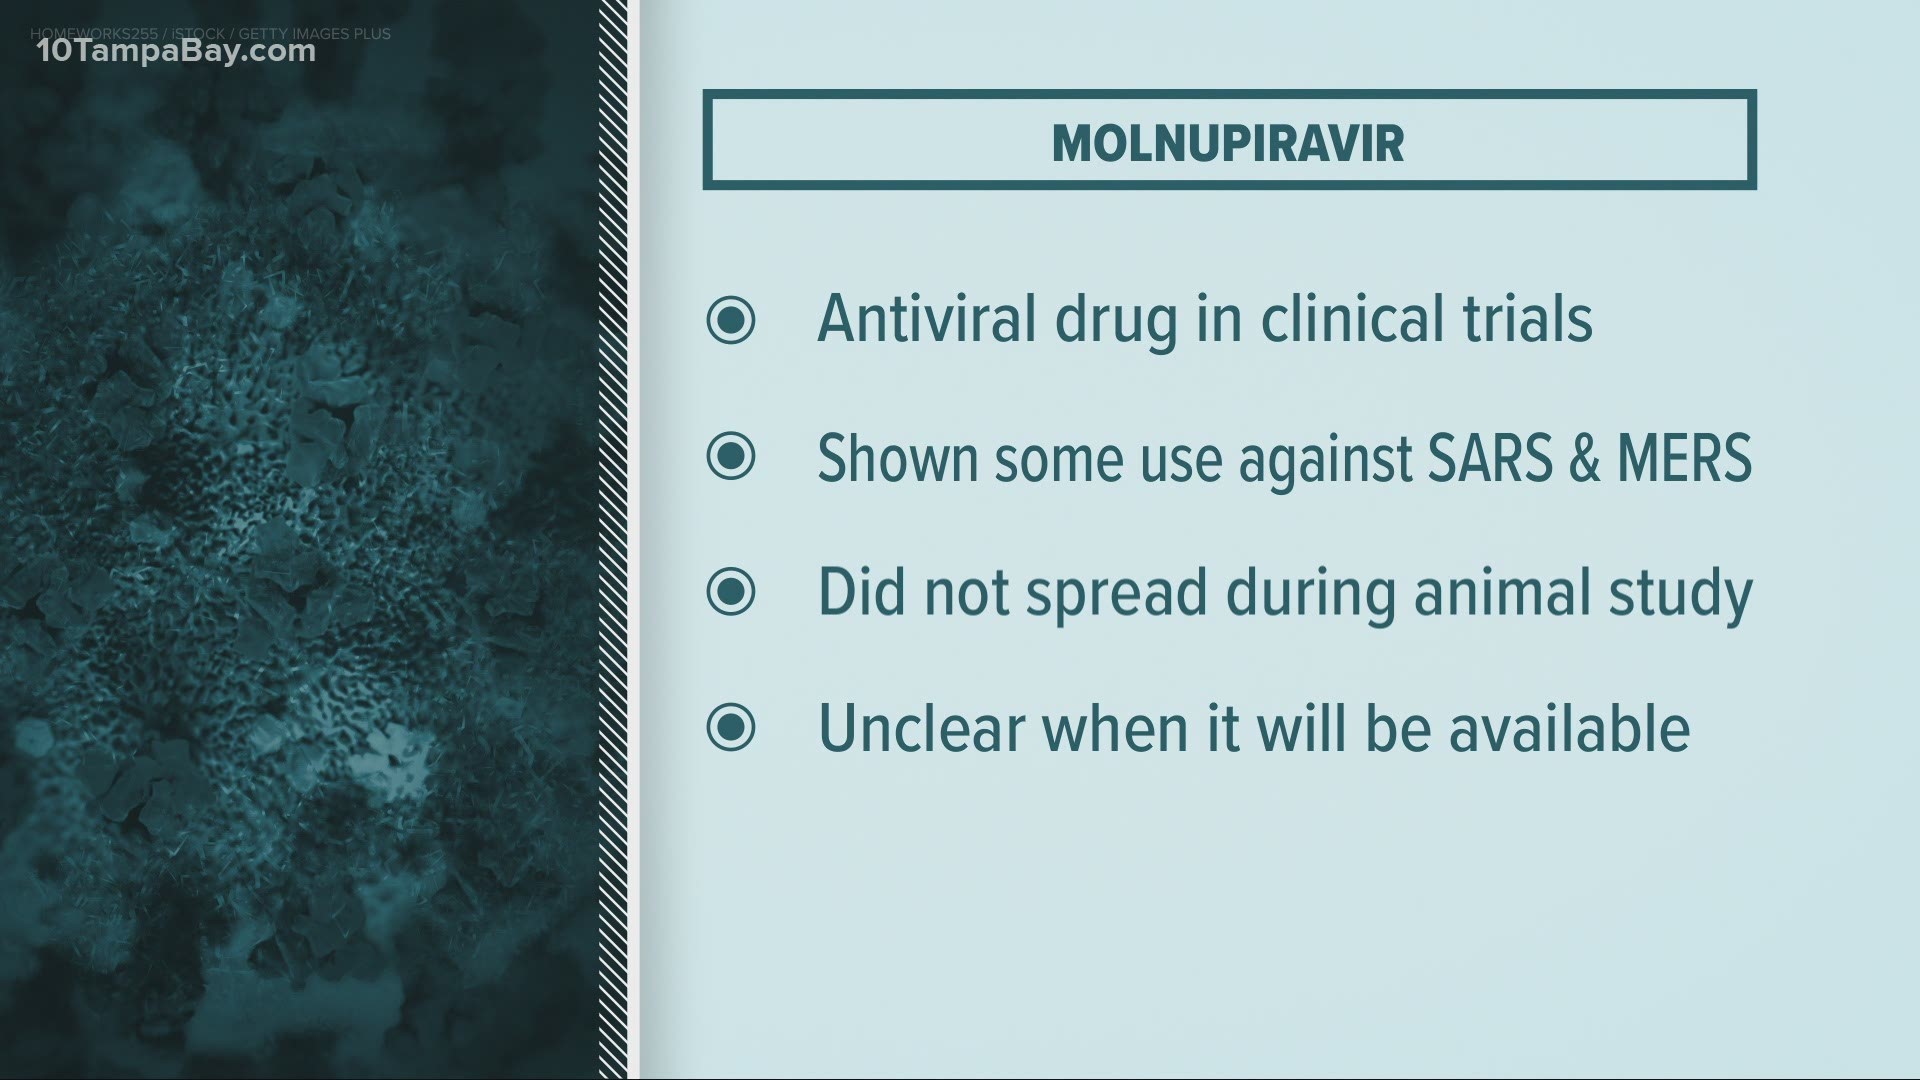 Molnupiravir is currently in clinical trials and could be a promising tool against coronavirus.